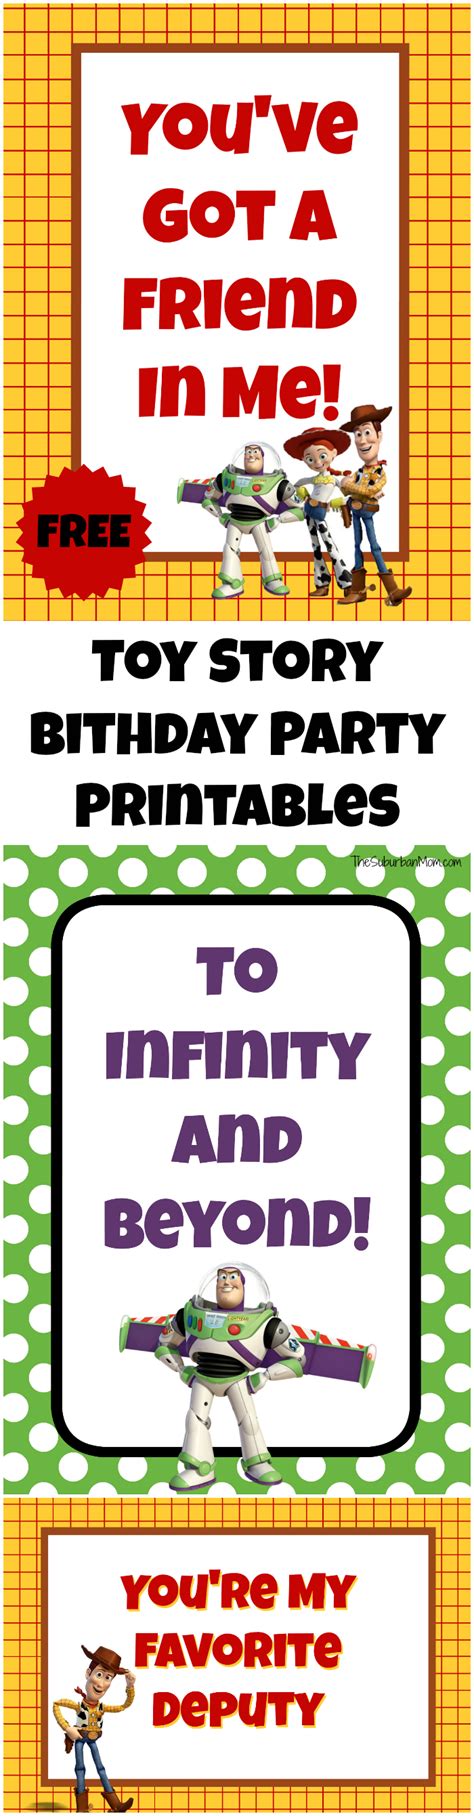 Toy Story Birthday Party Free Printables
